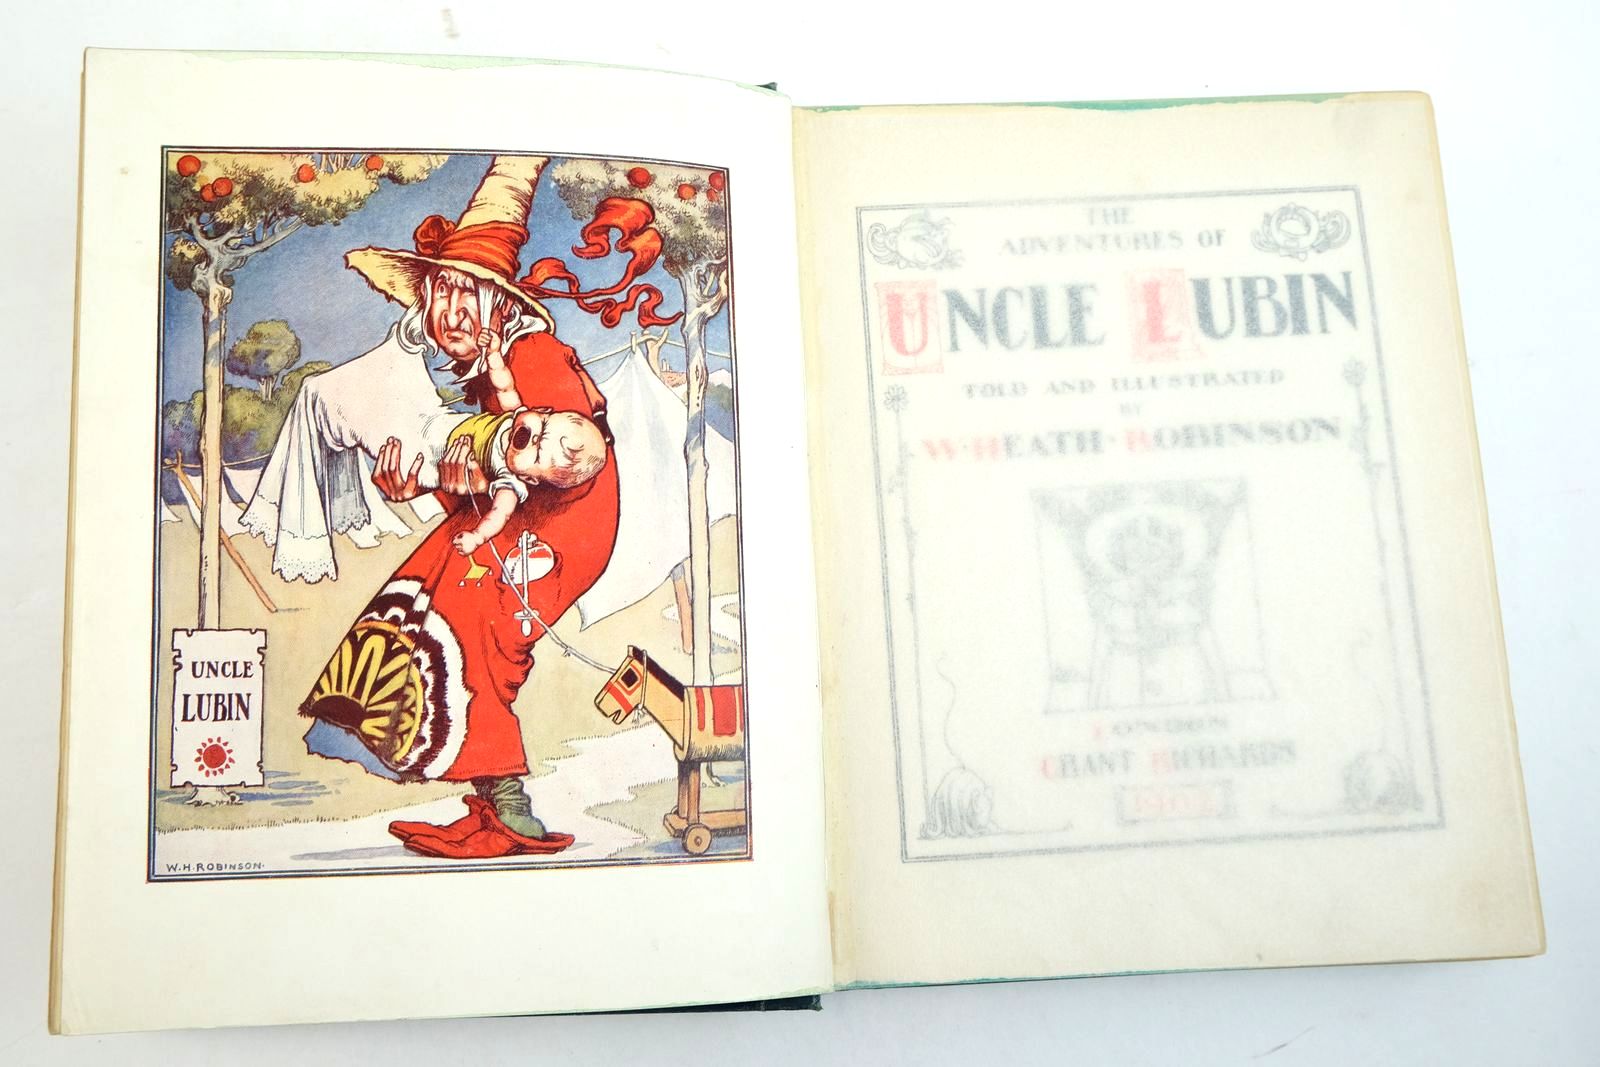 Photo of THE ADVENTURES OF UNCLE LUBIN written by Robinson, W. Heath illustrated by Robinson, W. Heath published by Grant Richards (STOCK CODE: 2134631)  for sale by Stella & Rose's Books